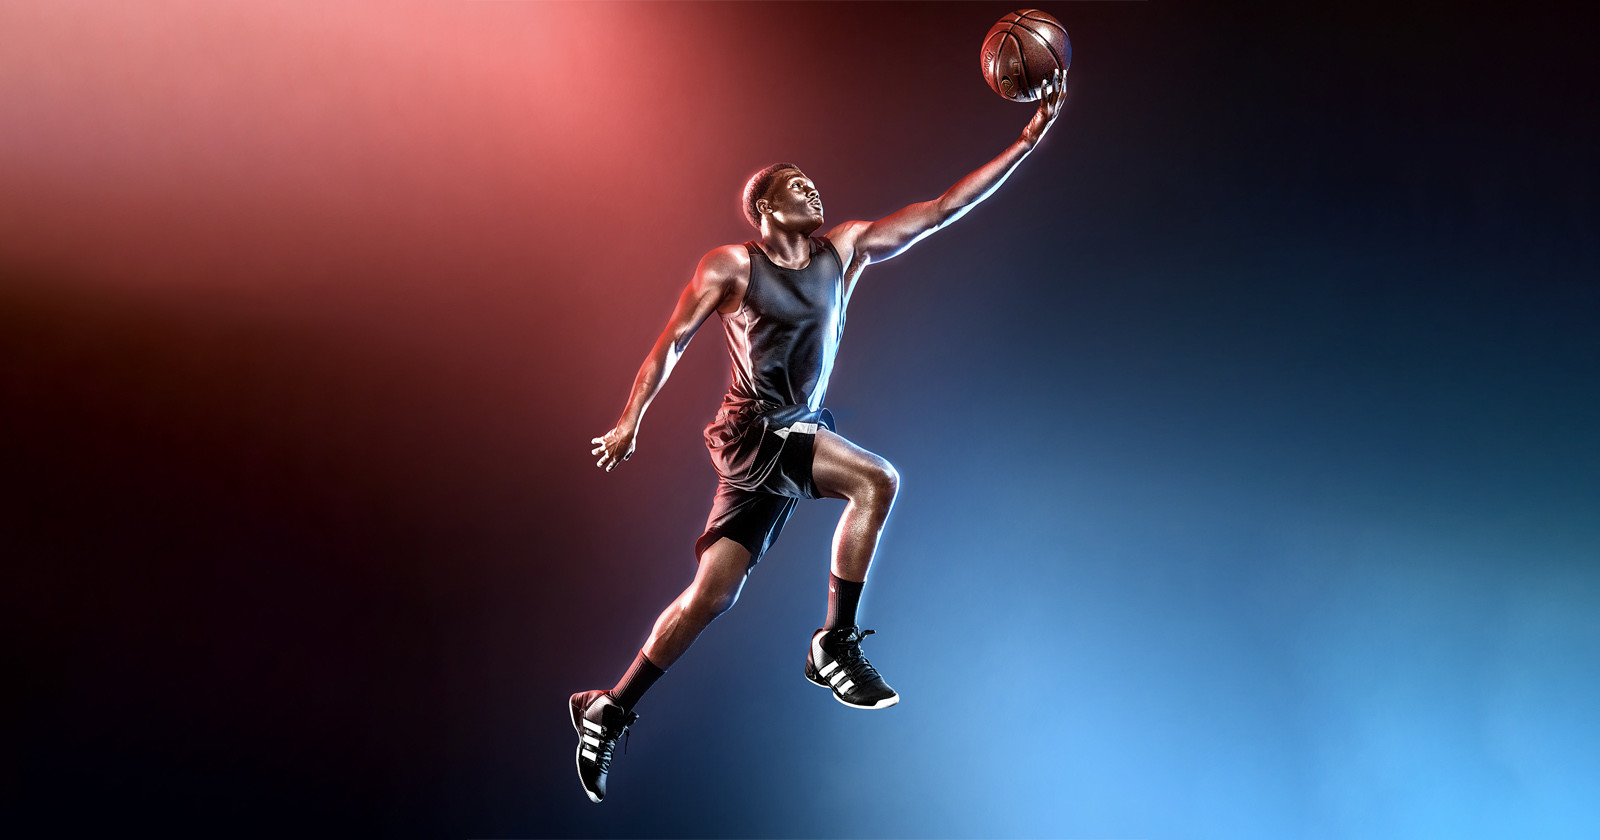 Sports as Art: Photographing Athletes is Different from Sports Photography